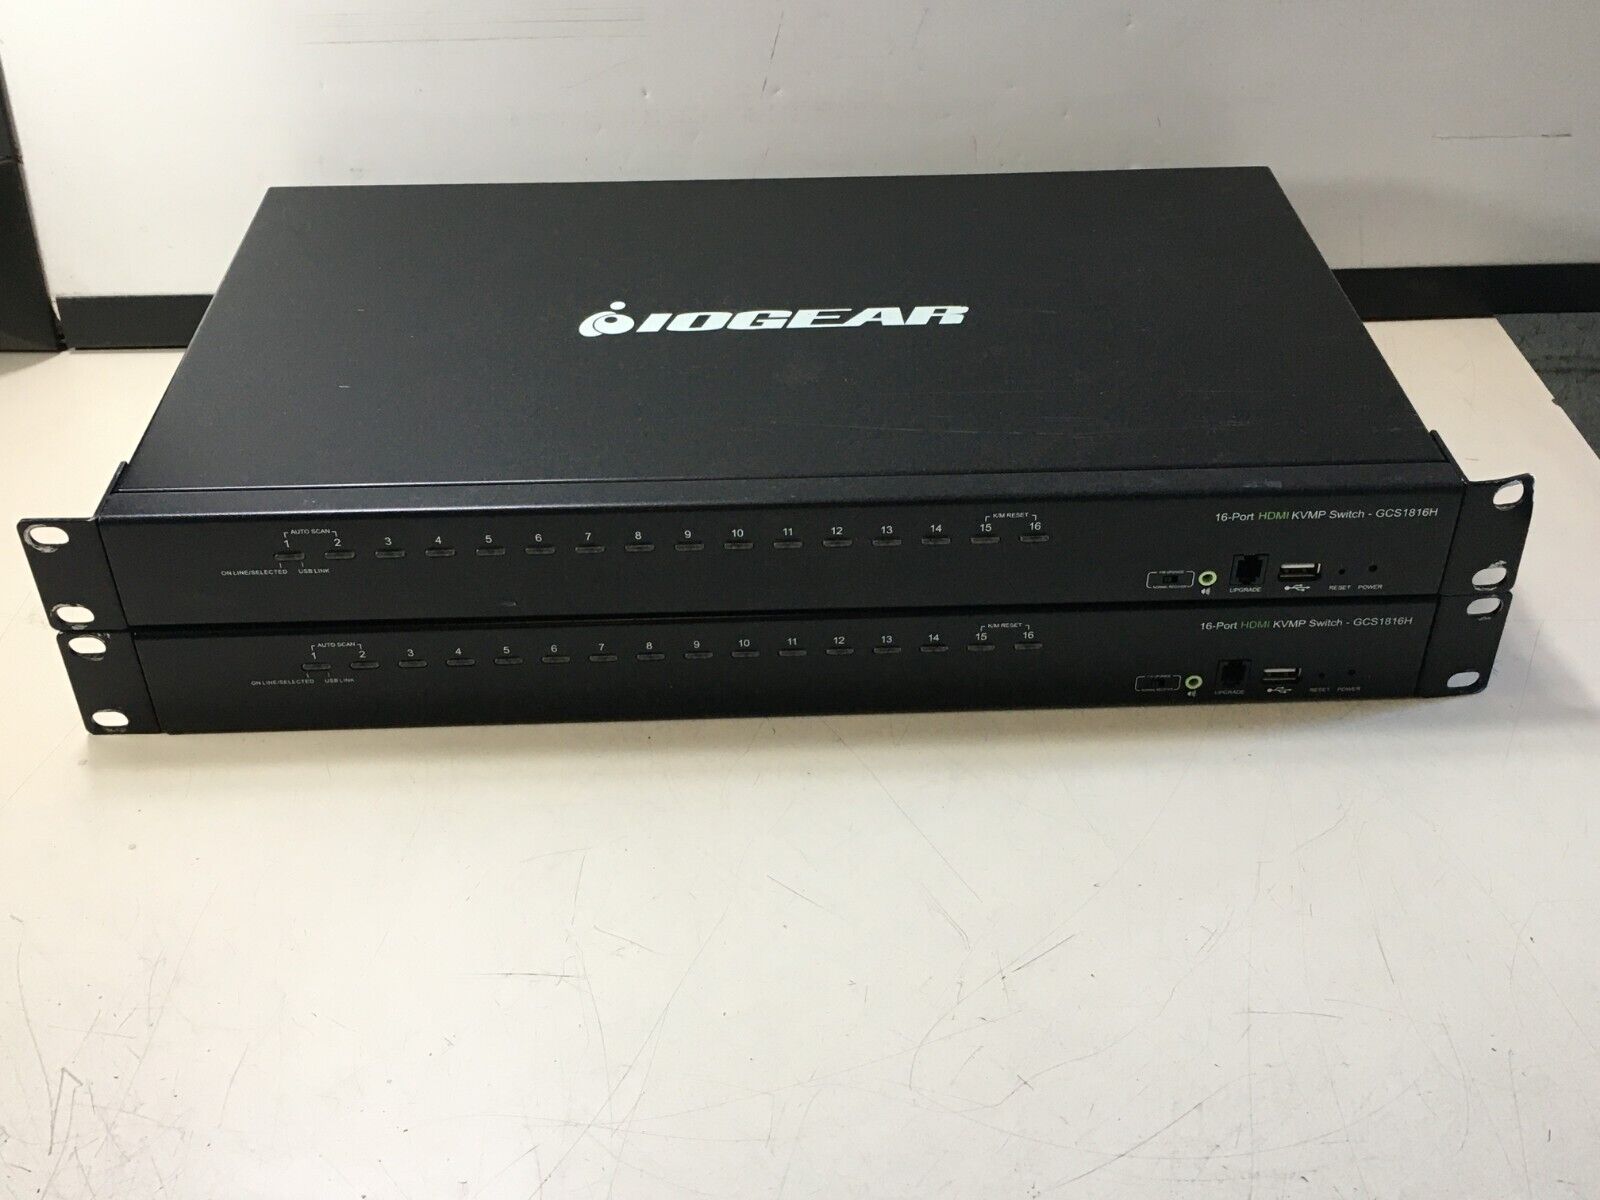 LOT OF 2:  IOGEAR GCS1816H 16-Port USB HDMI KVM SWITCH WITH AUDIO - USED PULL